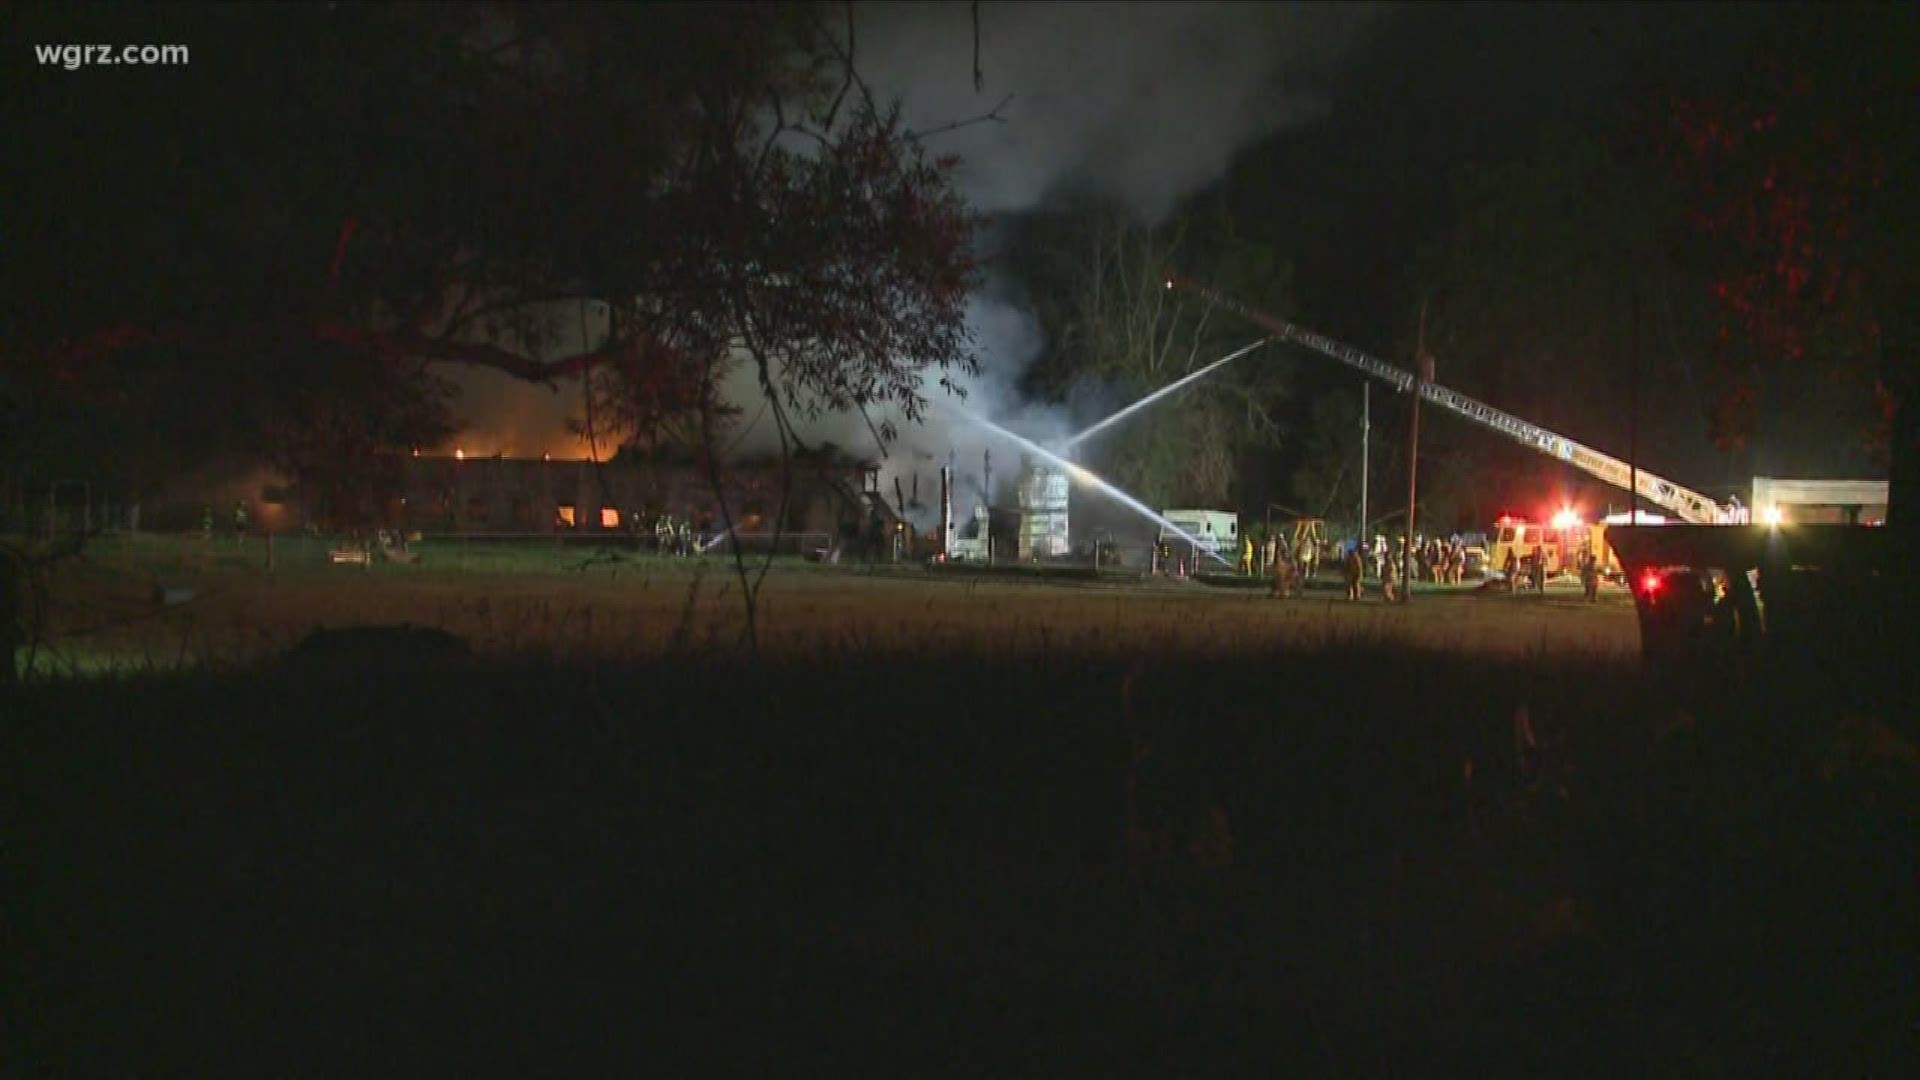 Over a dozen animals died after a massive barn fire in the village of Depew last night.